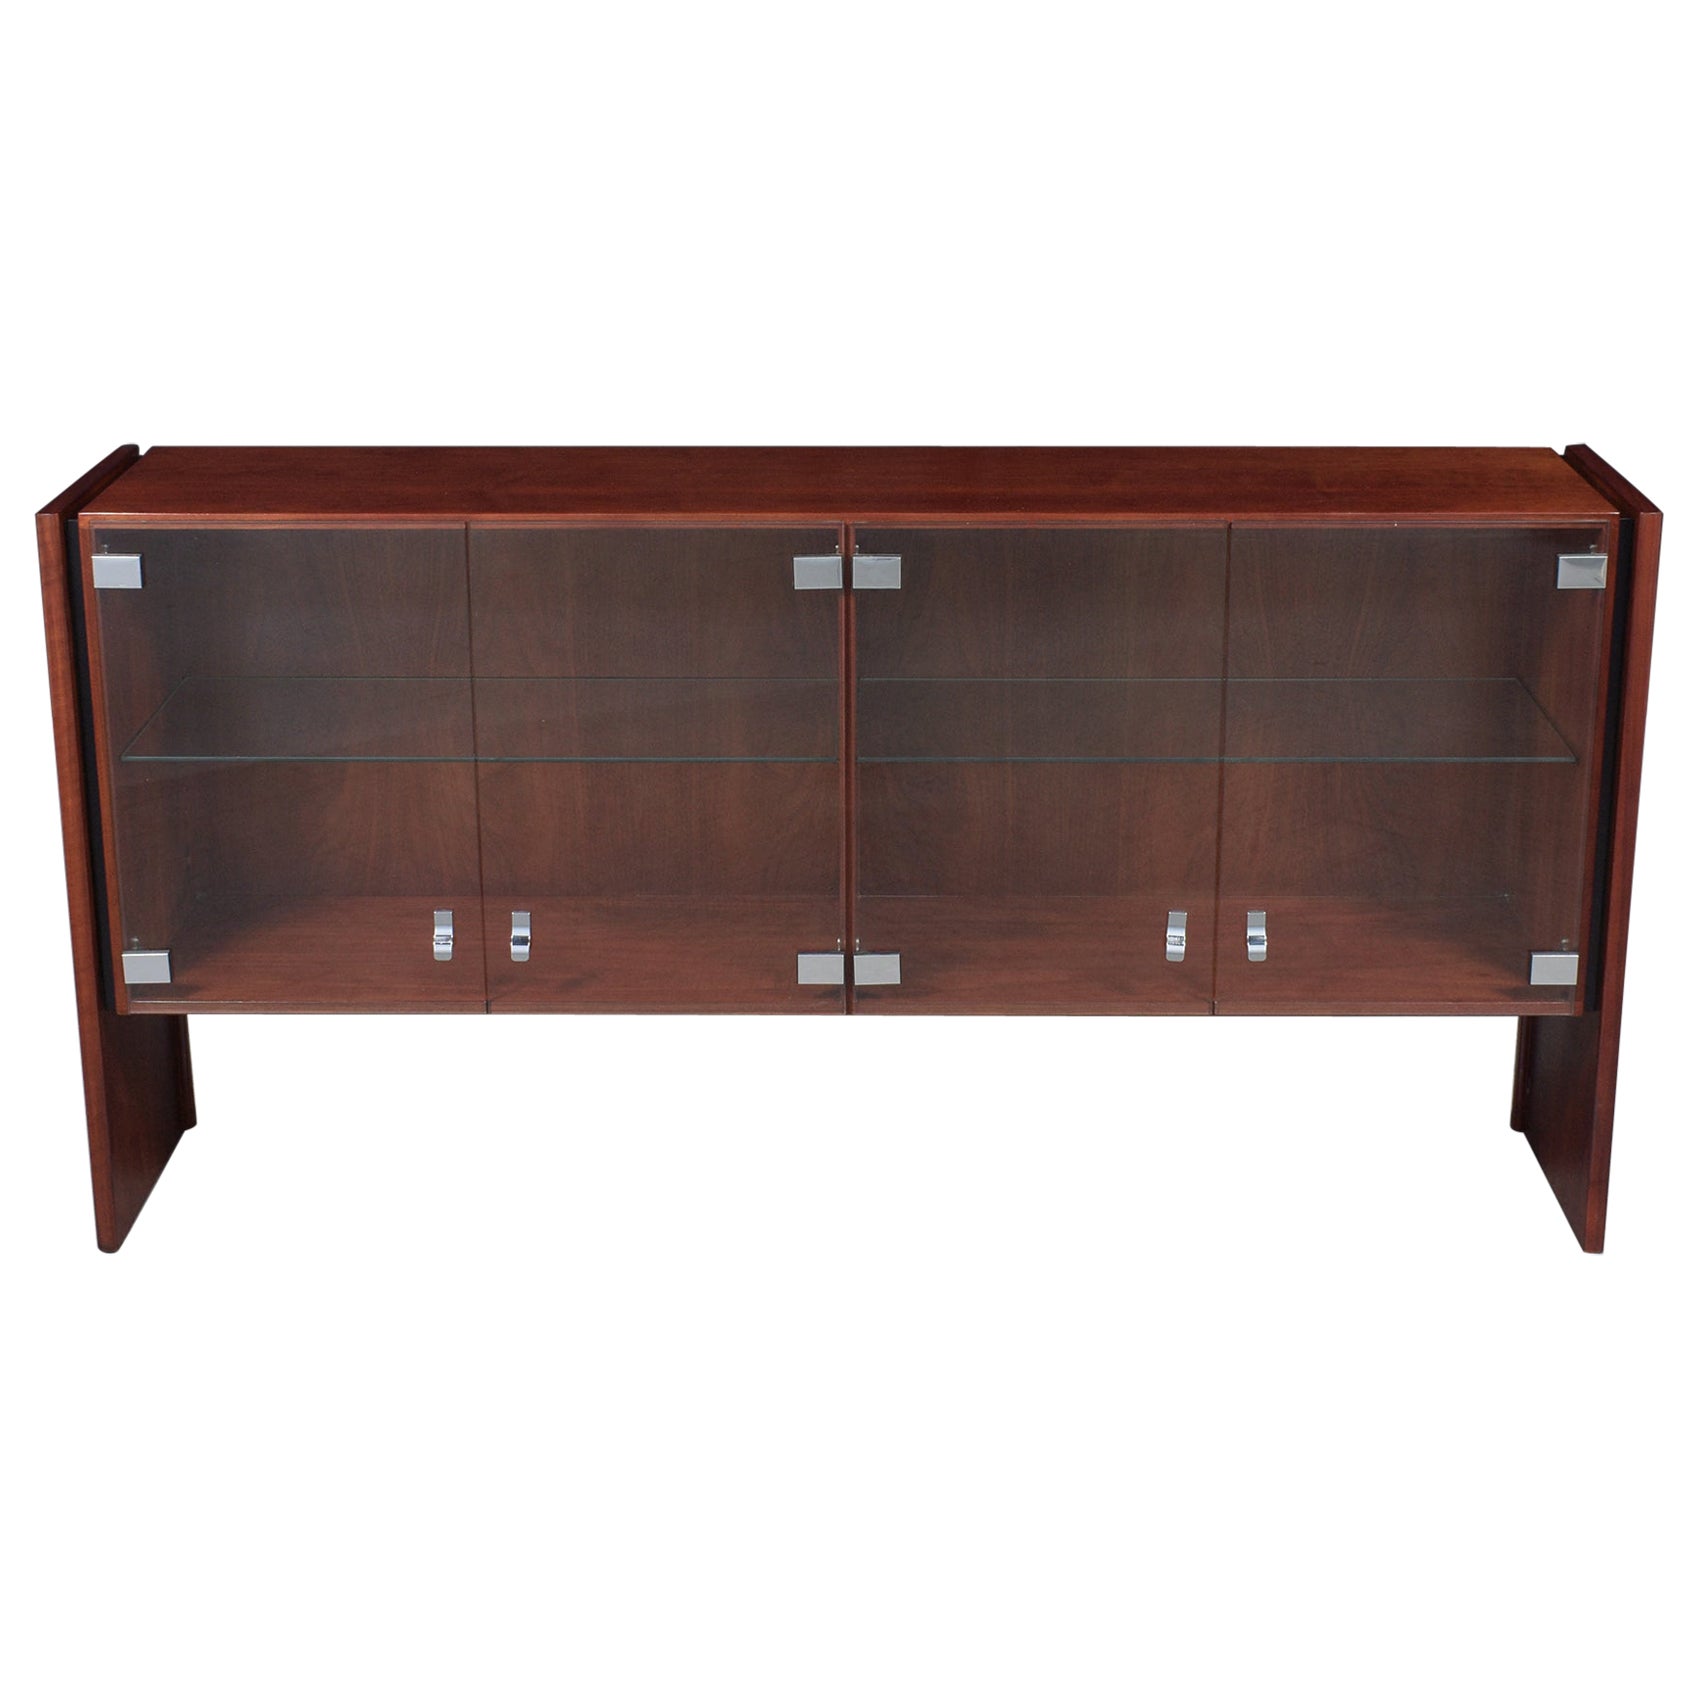 Restored 1960s Mahogany Cabinet: Mid-Century Elegance with Modern Flair